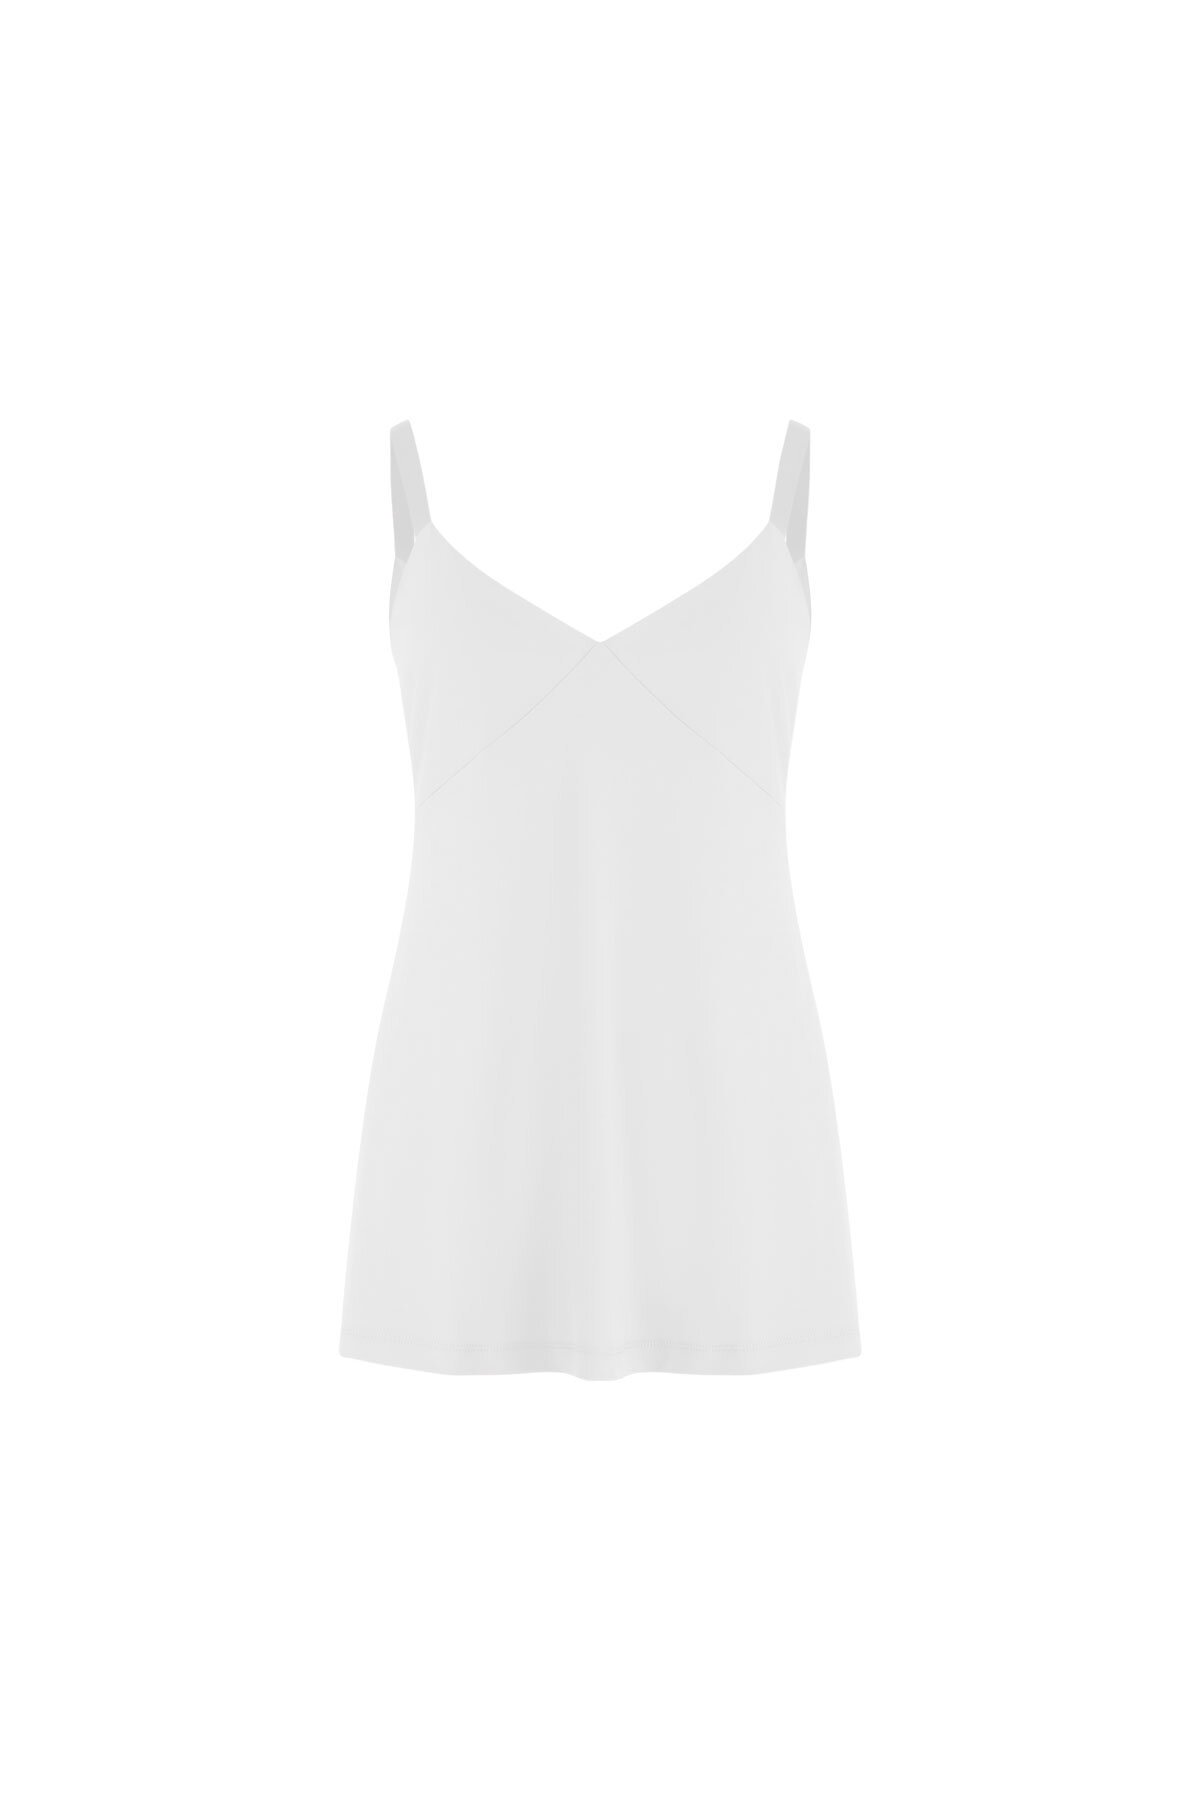 Curate Cami Thing Camisole - White